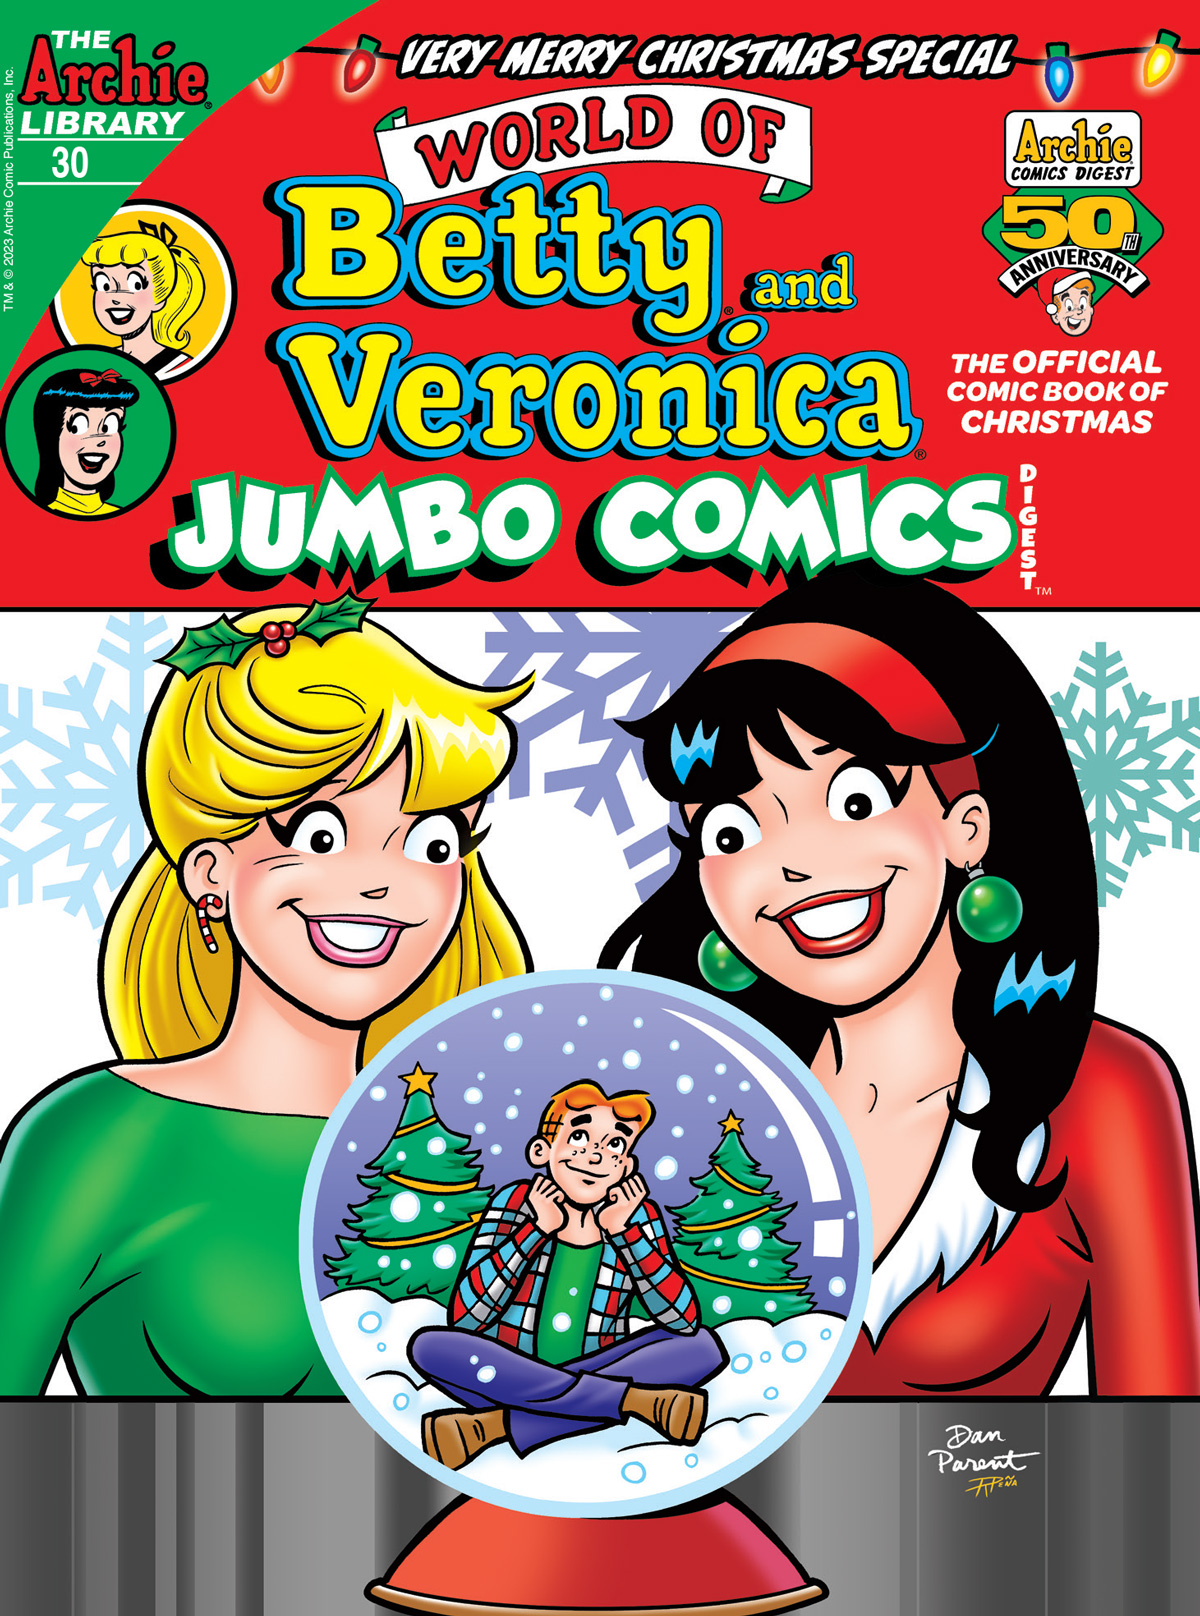 Cover of WORLD OF BETTY AND VERONICA DIGEST #30. Betty and Veronica look at Archie, who is shrunk down inside of a snow globe.